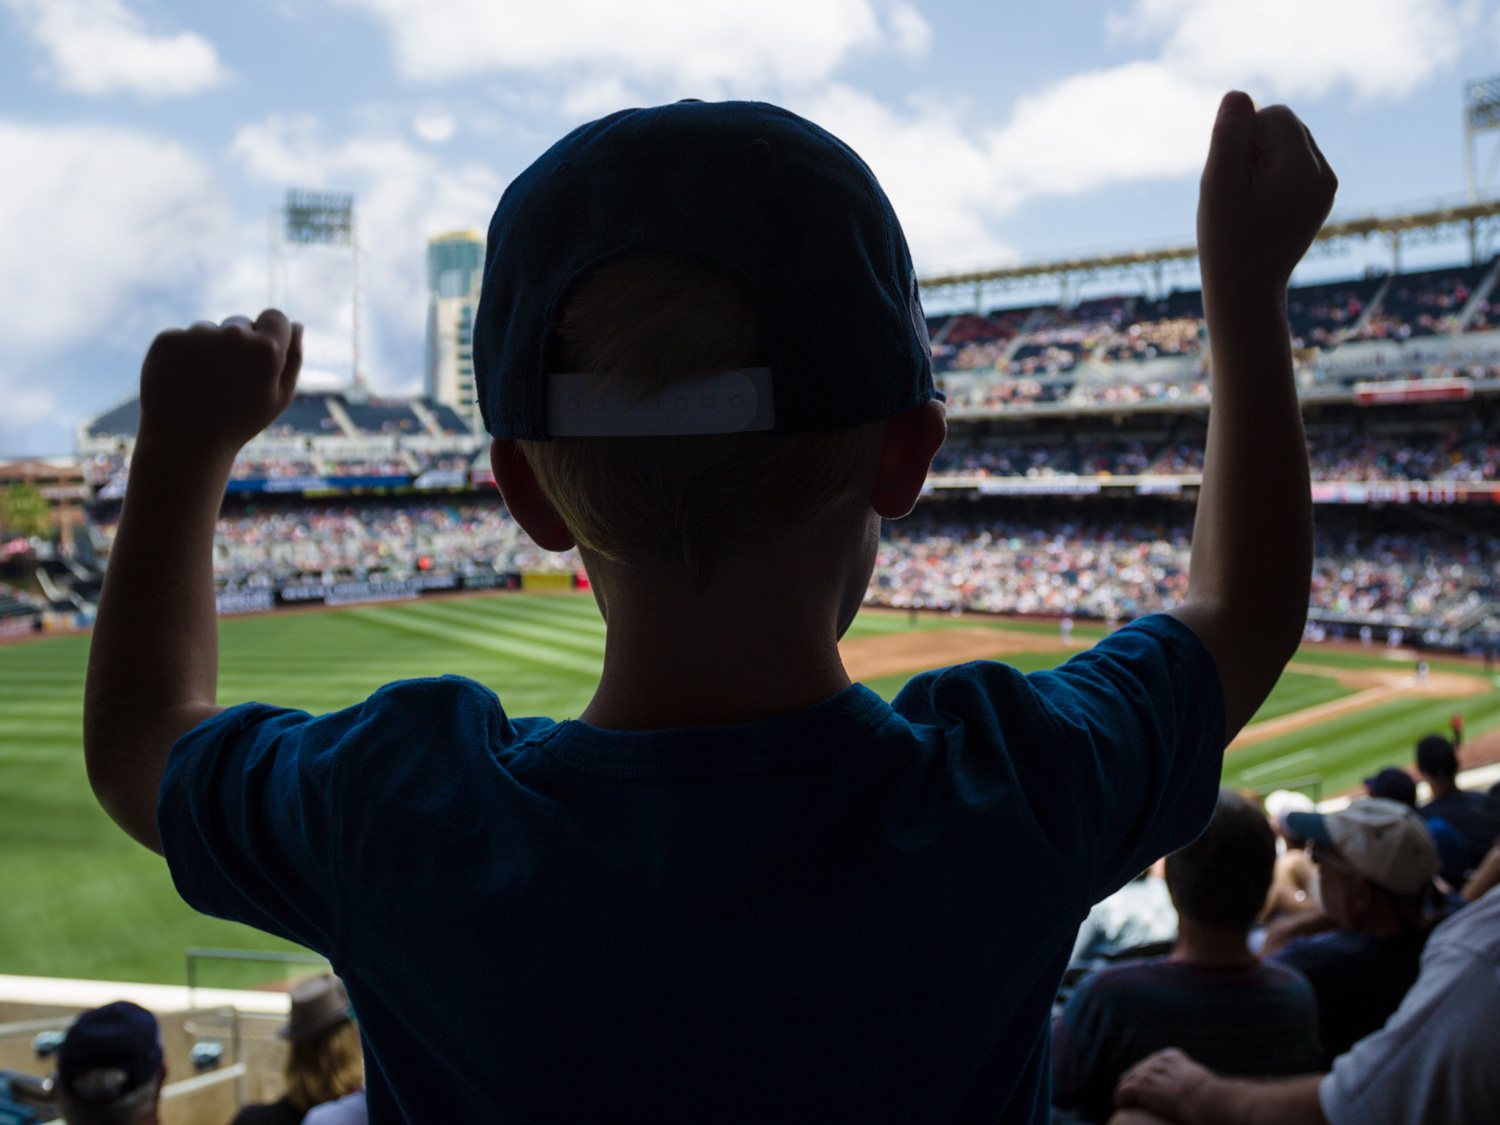 child-boy-cheering-at-baseball-games-ages-4-6-size-4-3.jpg